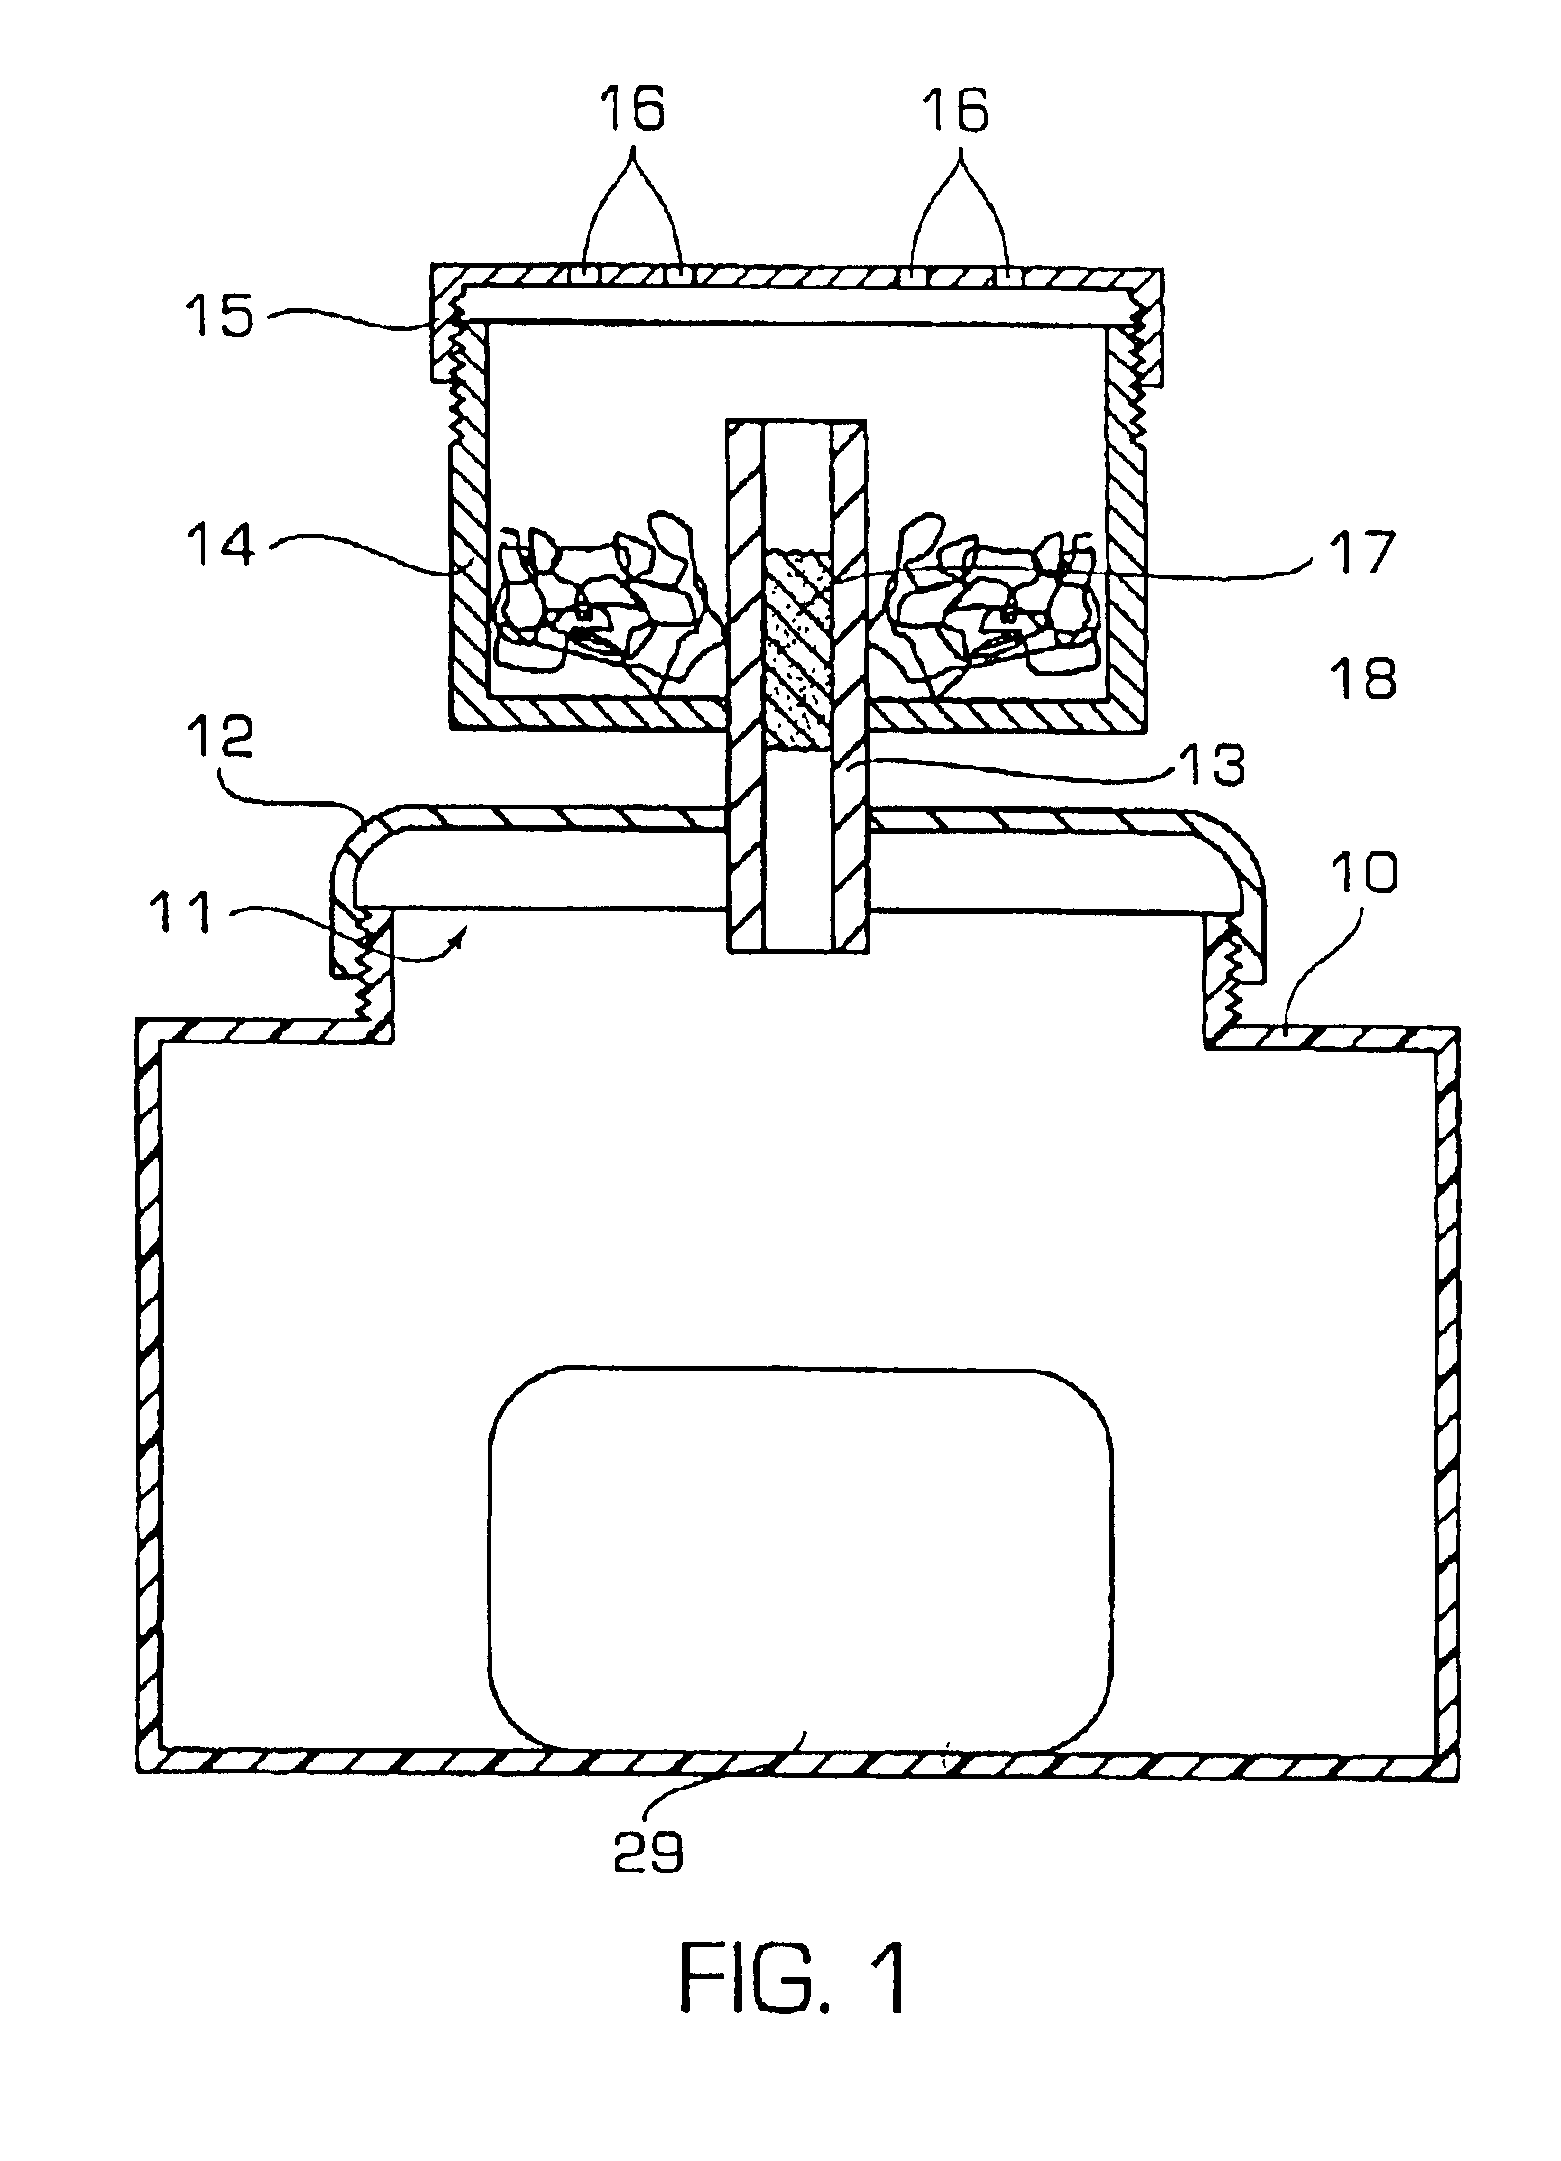 Apparatus for providing an environment of controlled water activity for storage of nematodes